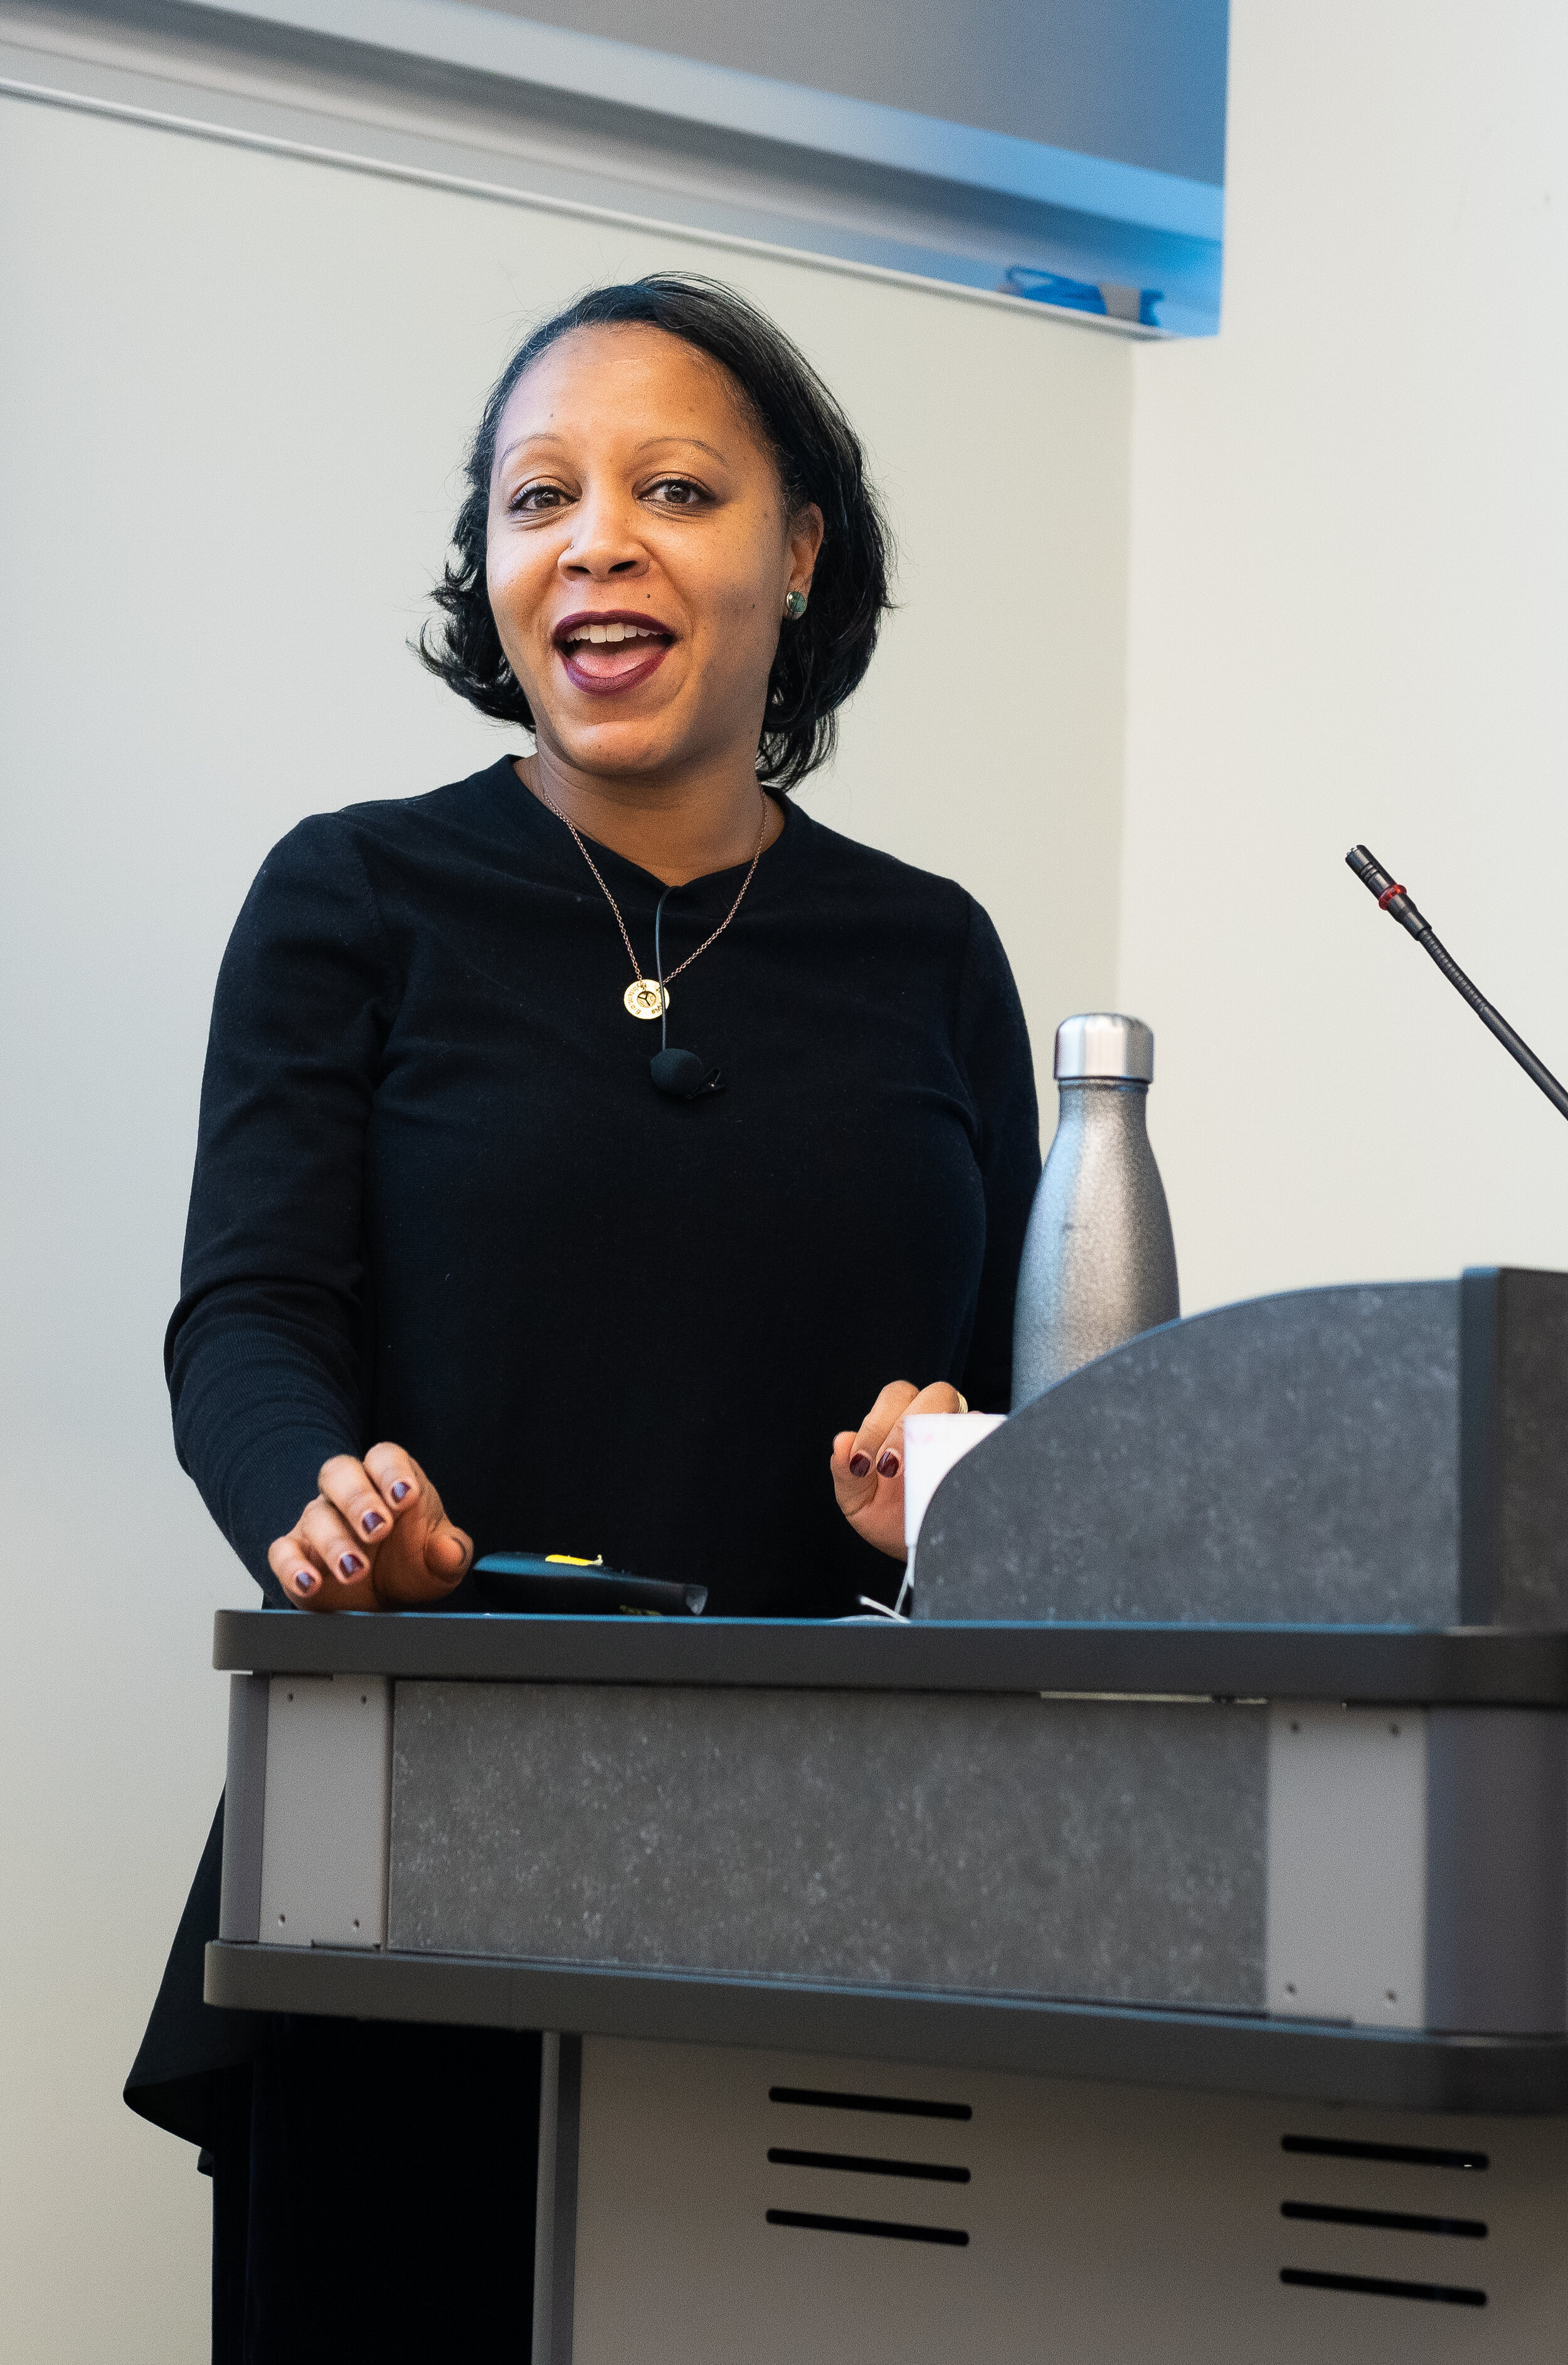   Christina Greer, Associate Professor of Political Science and American Studies at Fordham University was the event’s keynote speaker.  